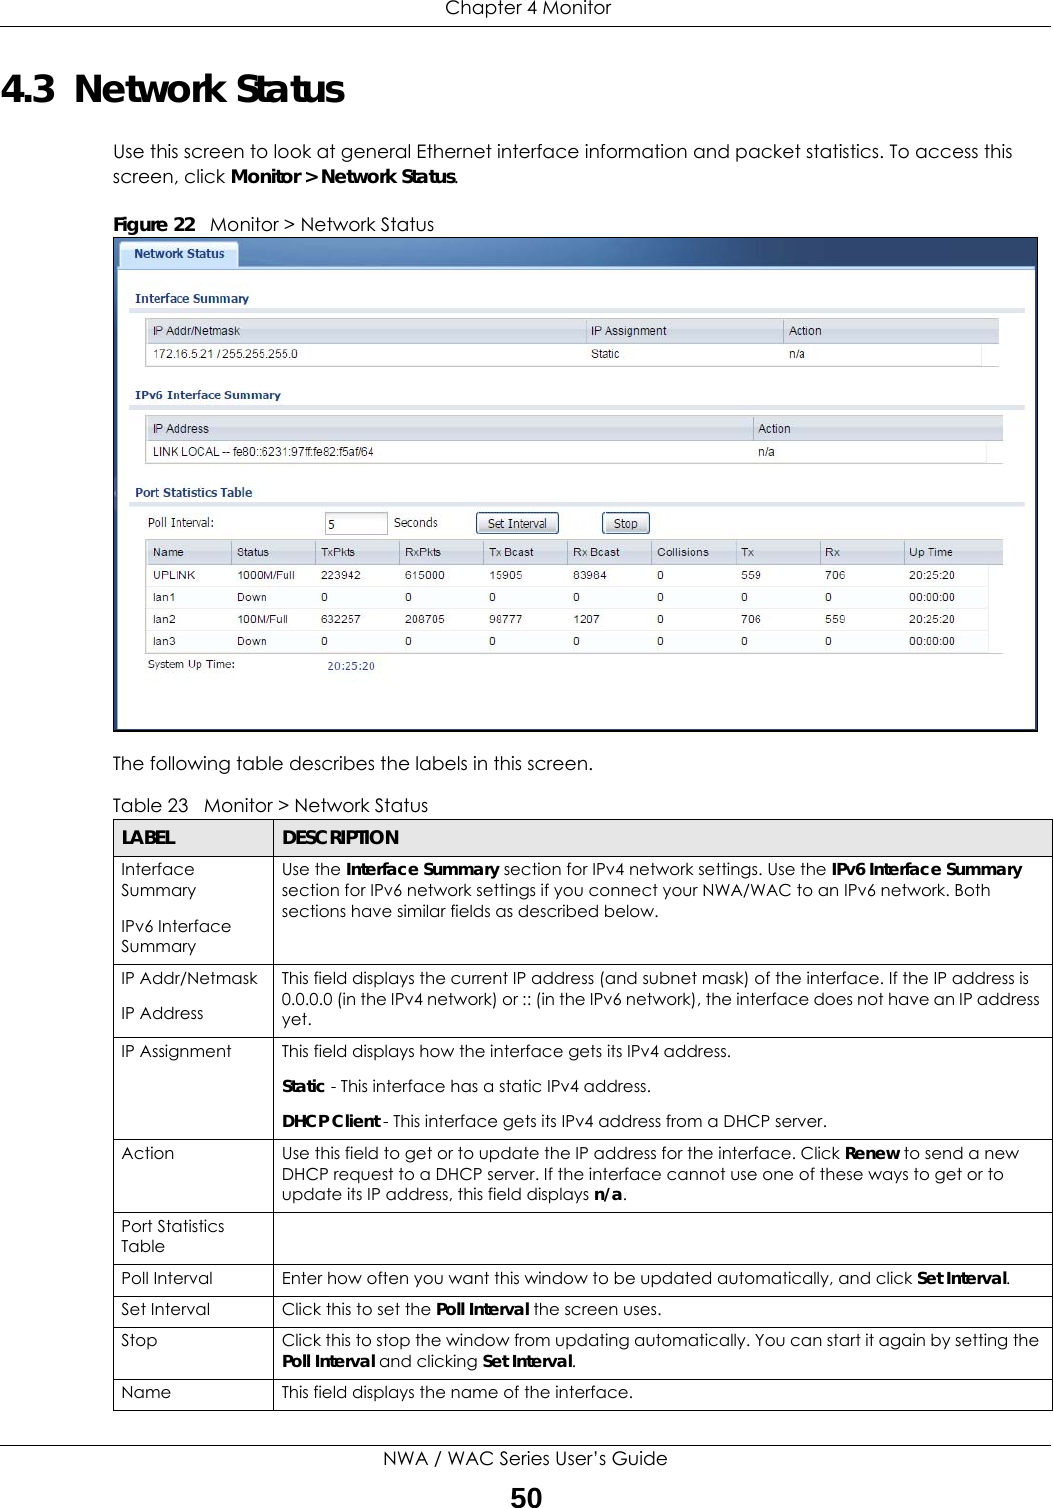  Chapter 4 MonitorNWA / WAC Series User’s Guide504.3  Network StatusUse this screen to look at general Ethernet interface information and packet statistics. To access this screen, click Monitor &gt; Network Status.Figure 22   Monitor &gt; Network Status          The following table describes the labels in this screen. Table 23   Monitor &gt; Network StatusLABEL DESCRIPTIONInterface Summary IPv6 Interface SummaryUse the Interface Summary section for IPv4 network settings. Use the IPv6 Interface Summary section for IPv6 network settings if you connect your NWA/WAC to an IPv6 network. Both sections have similar fields as described below.IP Addr/NetmaskIP AddressThis field displays the current IP address (and subnet mask) of the interface. If the IP address is 0.0.0.0 (in the IPv4 network) or :: (in the IPv6 network), the interface does not have an IP address yet.IP Assignment This field displays how the interface gets its IPv4 address.Static - This interface has a static IPv4 address.DHCP Client - This interface gets its IPv4 address from a DHCP server.Action Use this field to get or to update the IP address for the interface. Click Renew to send a new DHCP request to a DHCP server. If the interface cannot use one of these ways to get or to update its IP address, this field displays n/a.Port Statistics TablePoll Interval Enter how often you want this window to be updated automatically, and click Set Interval.Set Interval Click this to set the Poll Interval the screen uses.Stop Click this to stop the window from updating automatically. You can start it again by setting the Poll Interval and clicking Set Interval.Name This field displays the name of the interface. 